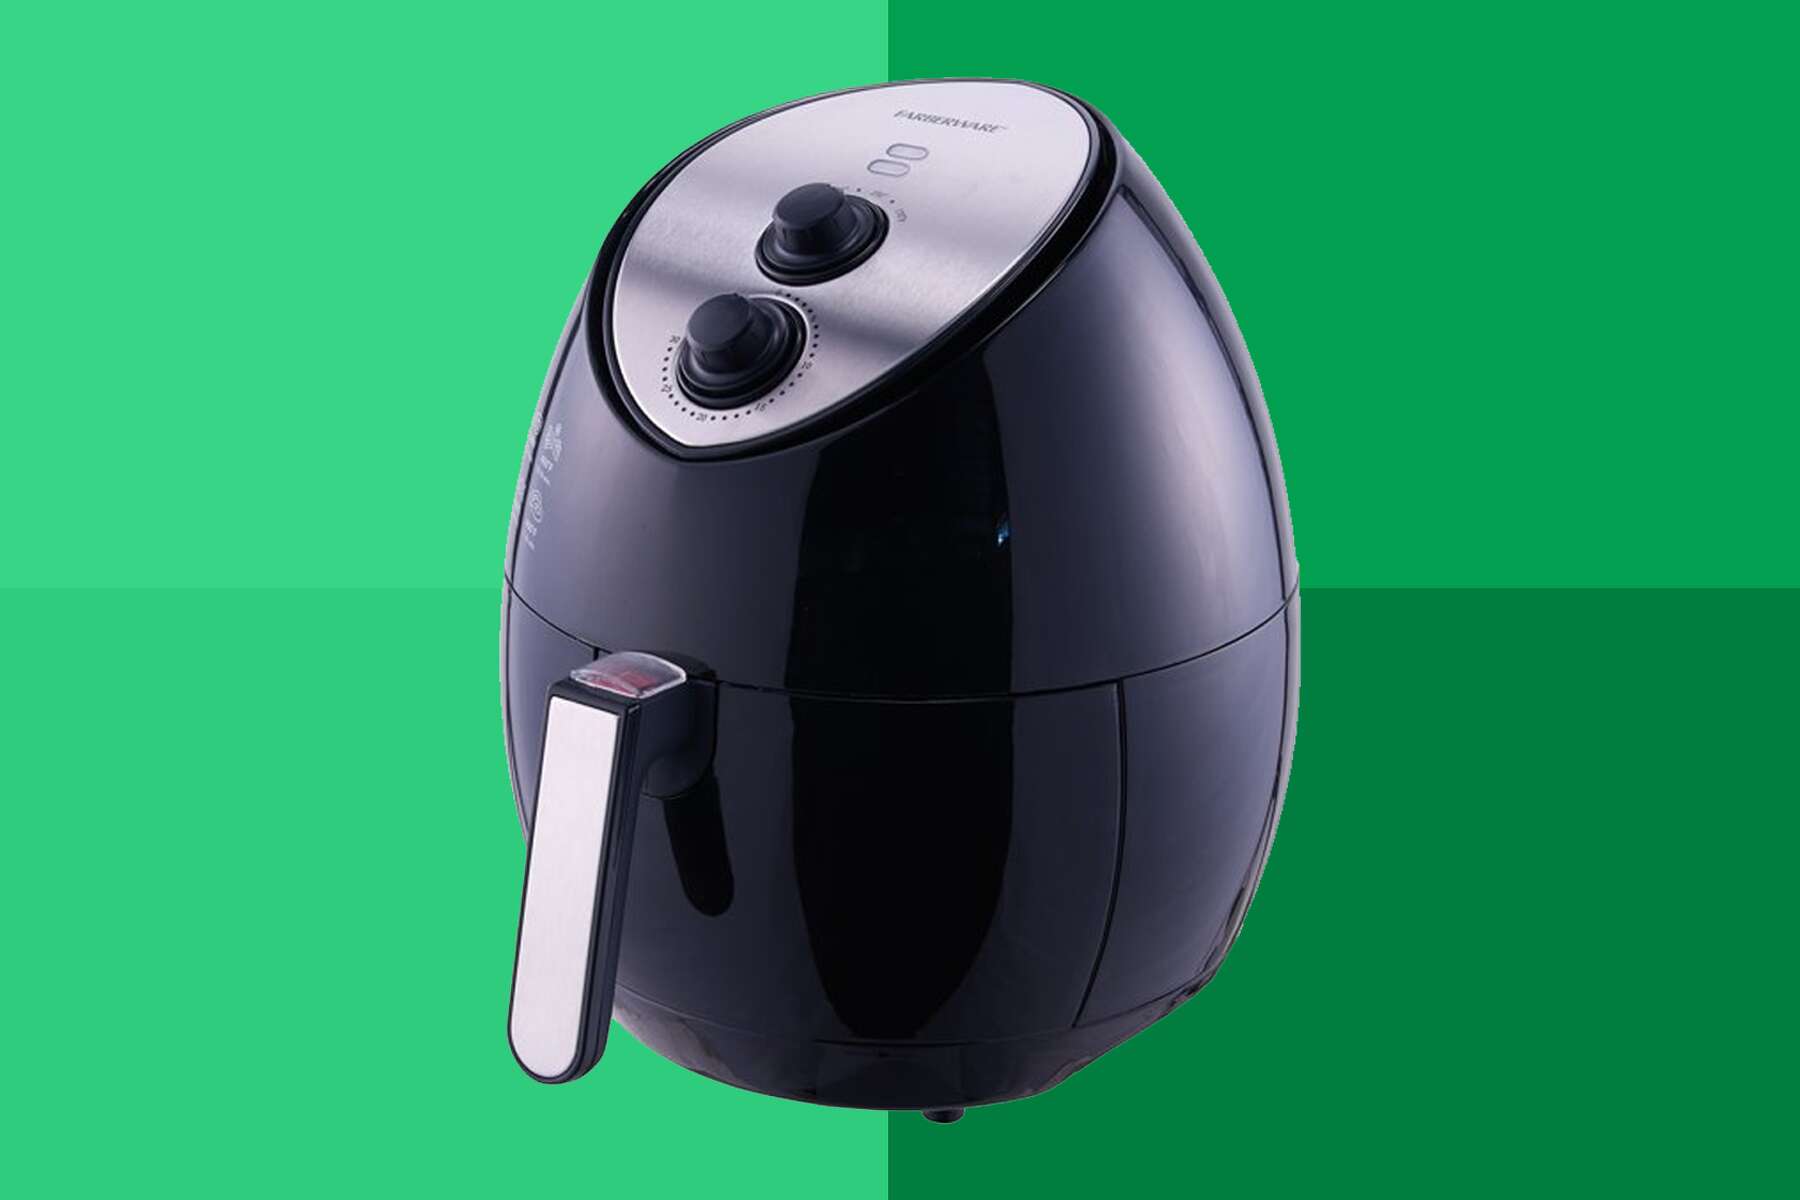 Join the convection current cult with this $29 air fryer